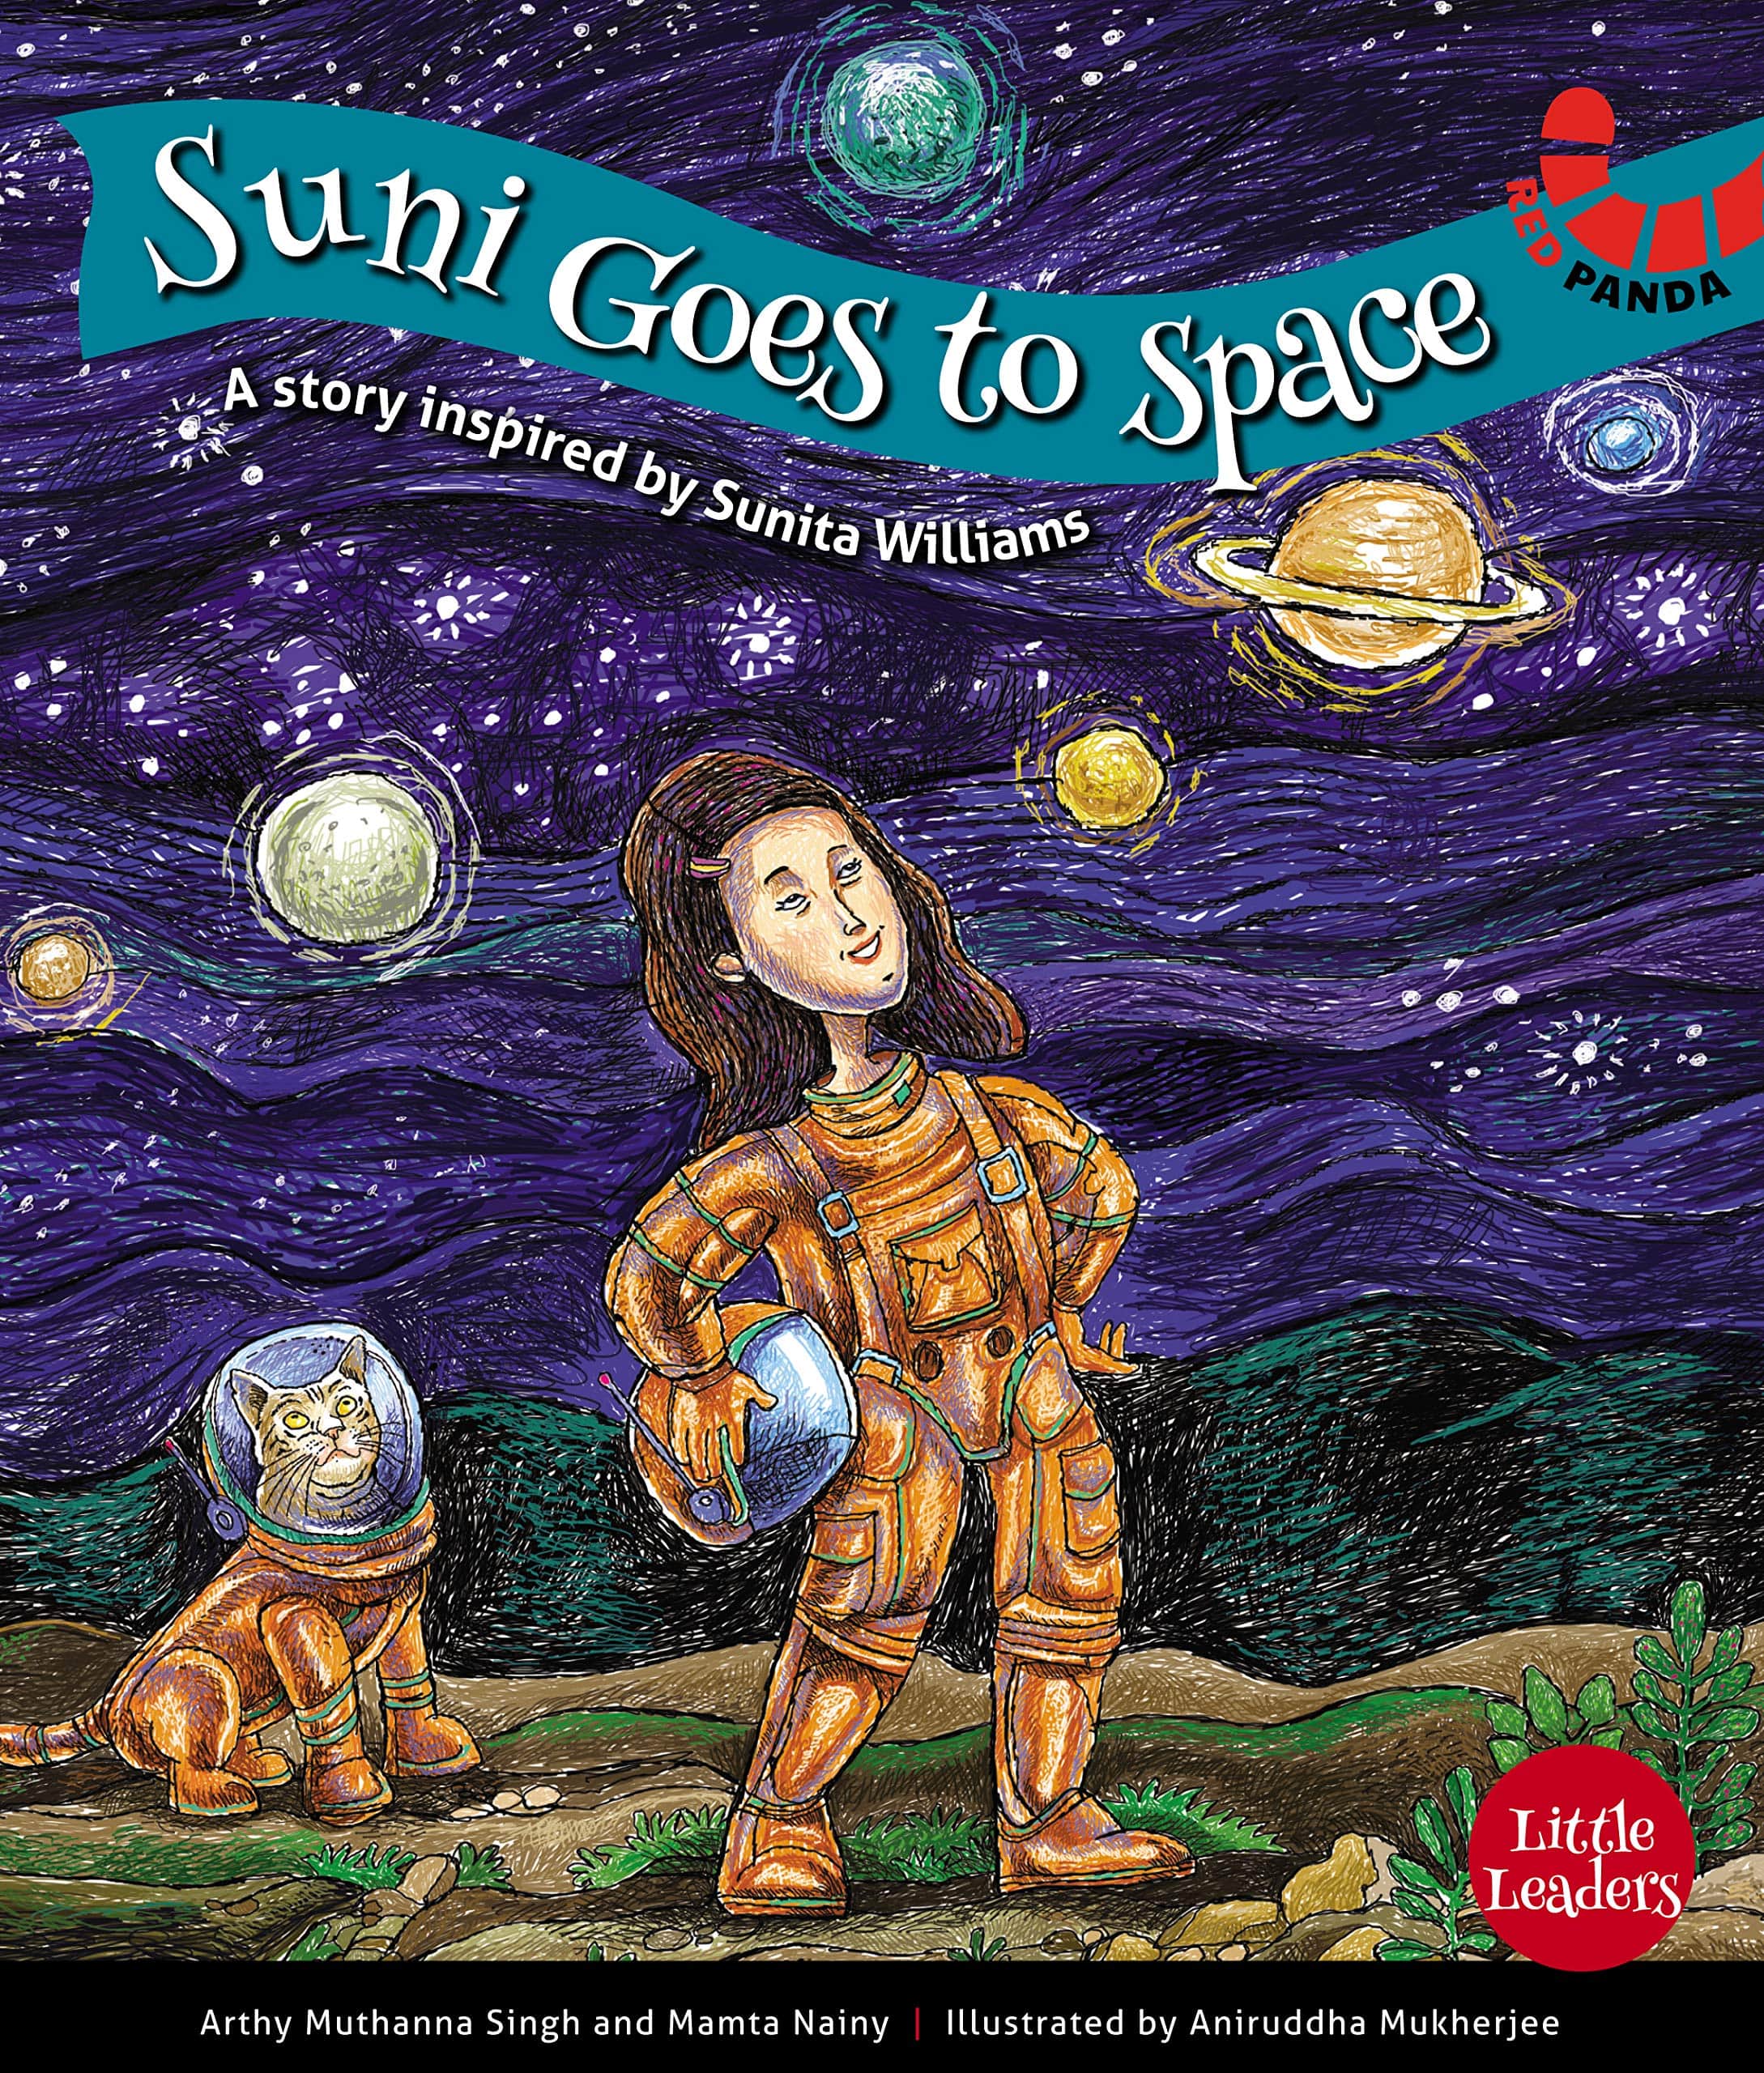 IMG : Little Leaders Suni Goes  to Space. Story inspired by Sunita Williams